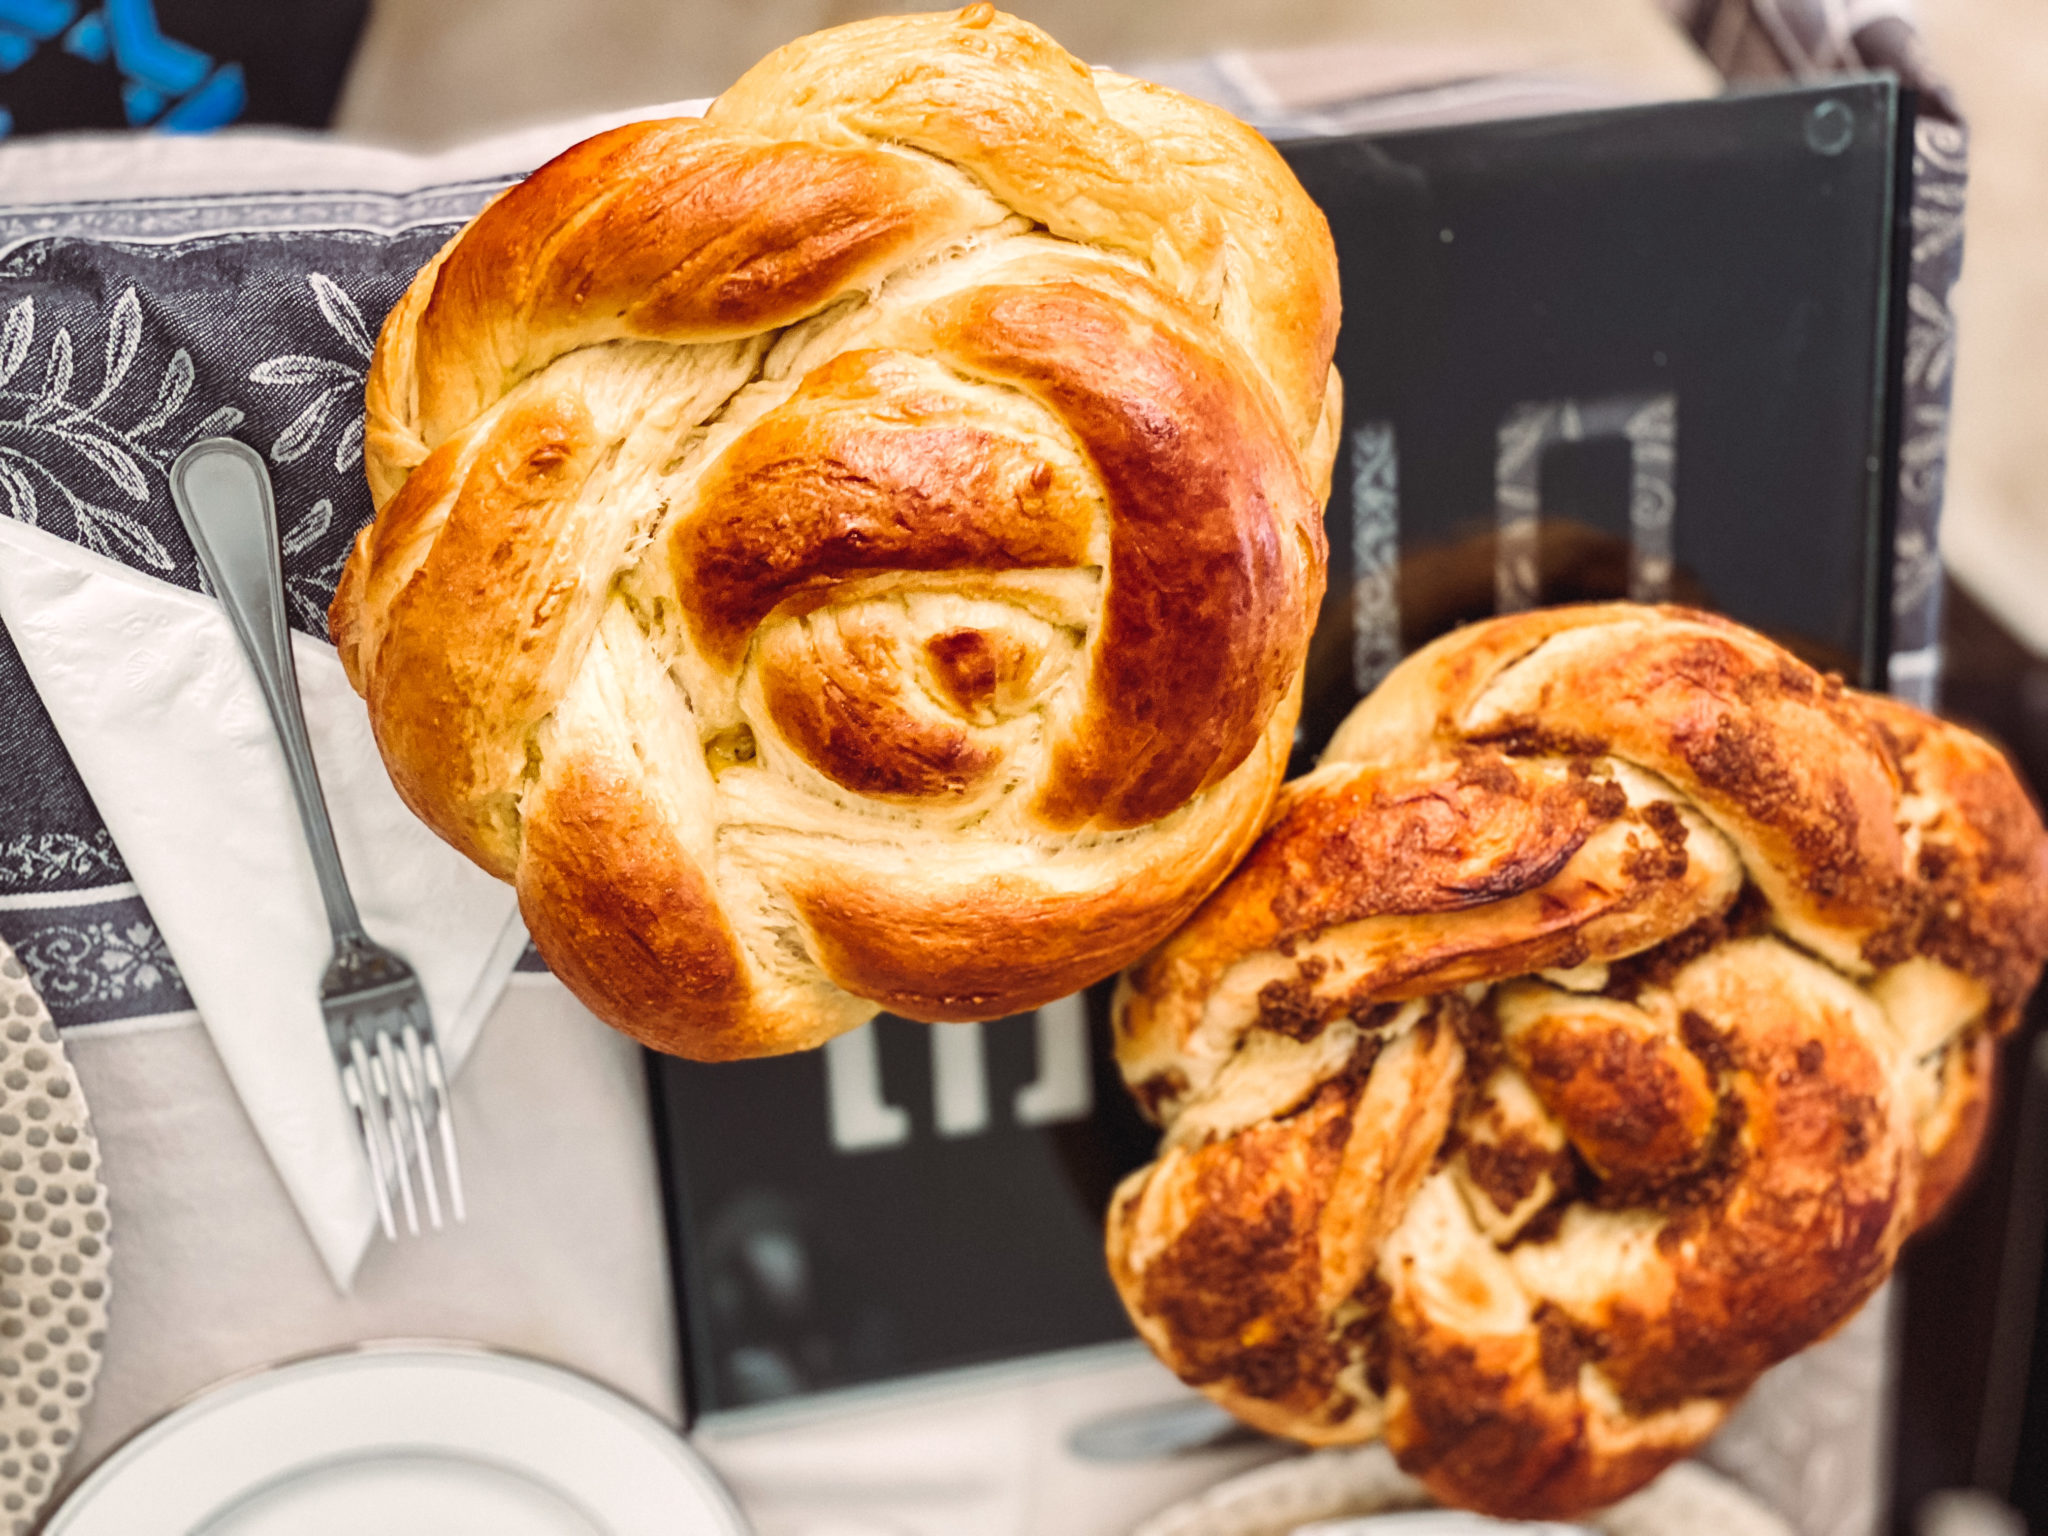 Learn the easiest way to make round challah bread for Rosh Hashanah, the Jewish New Year. Your home will smell like a bakery!